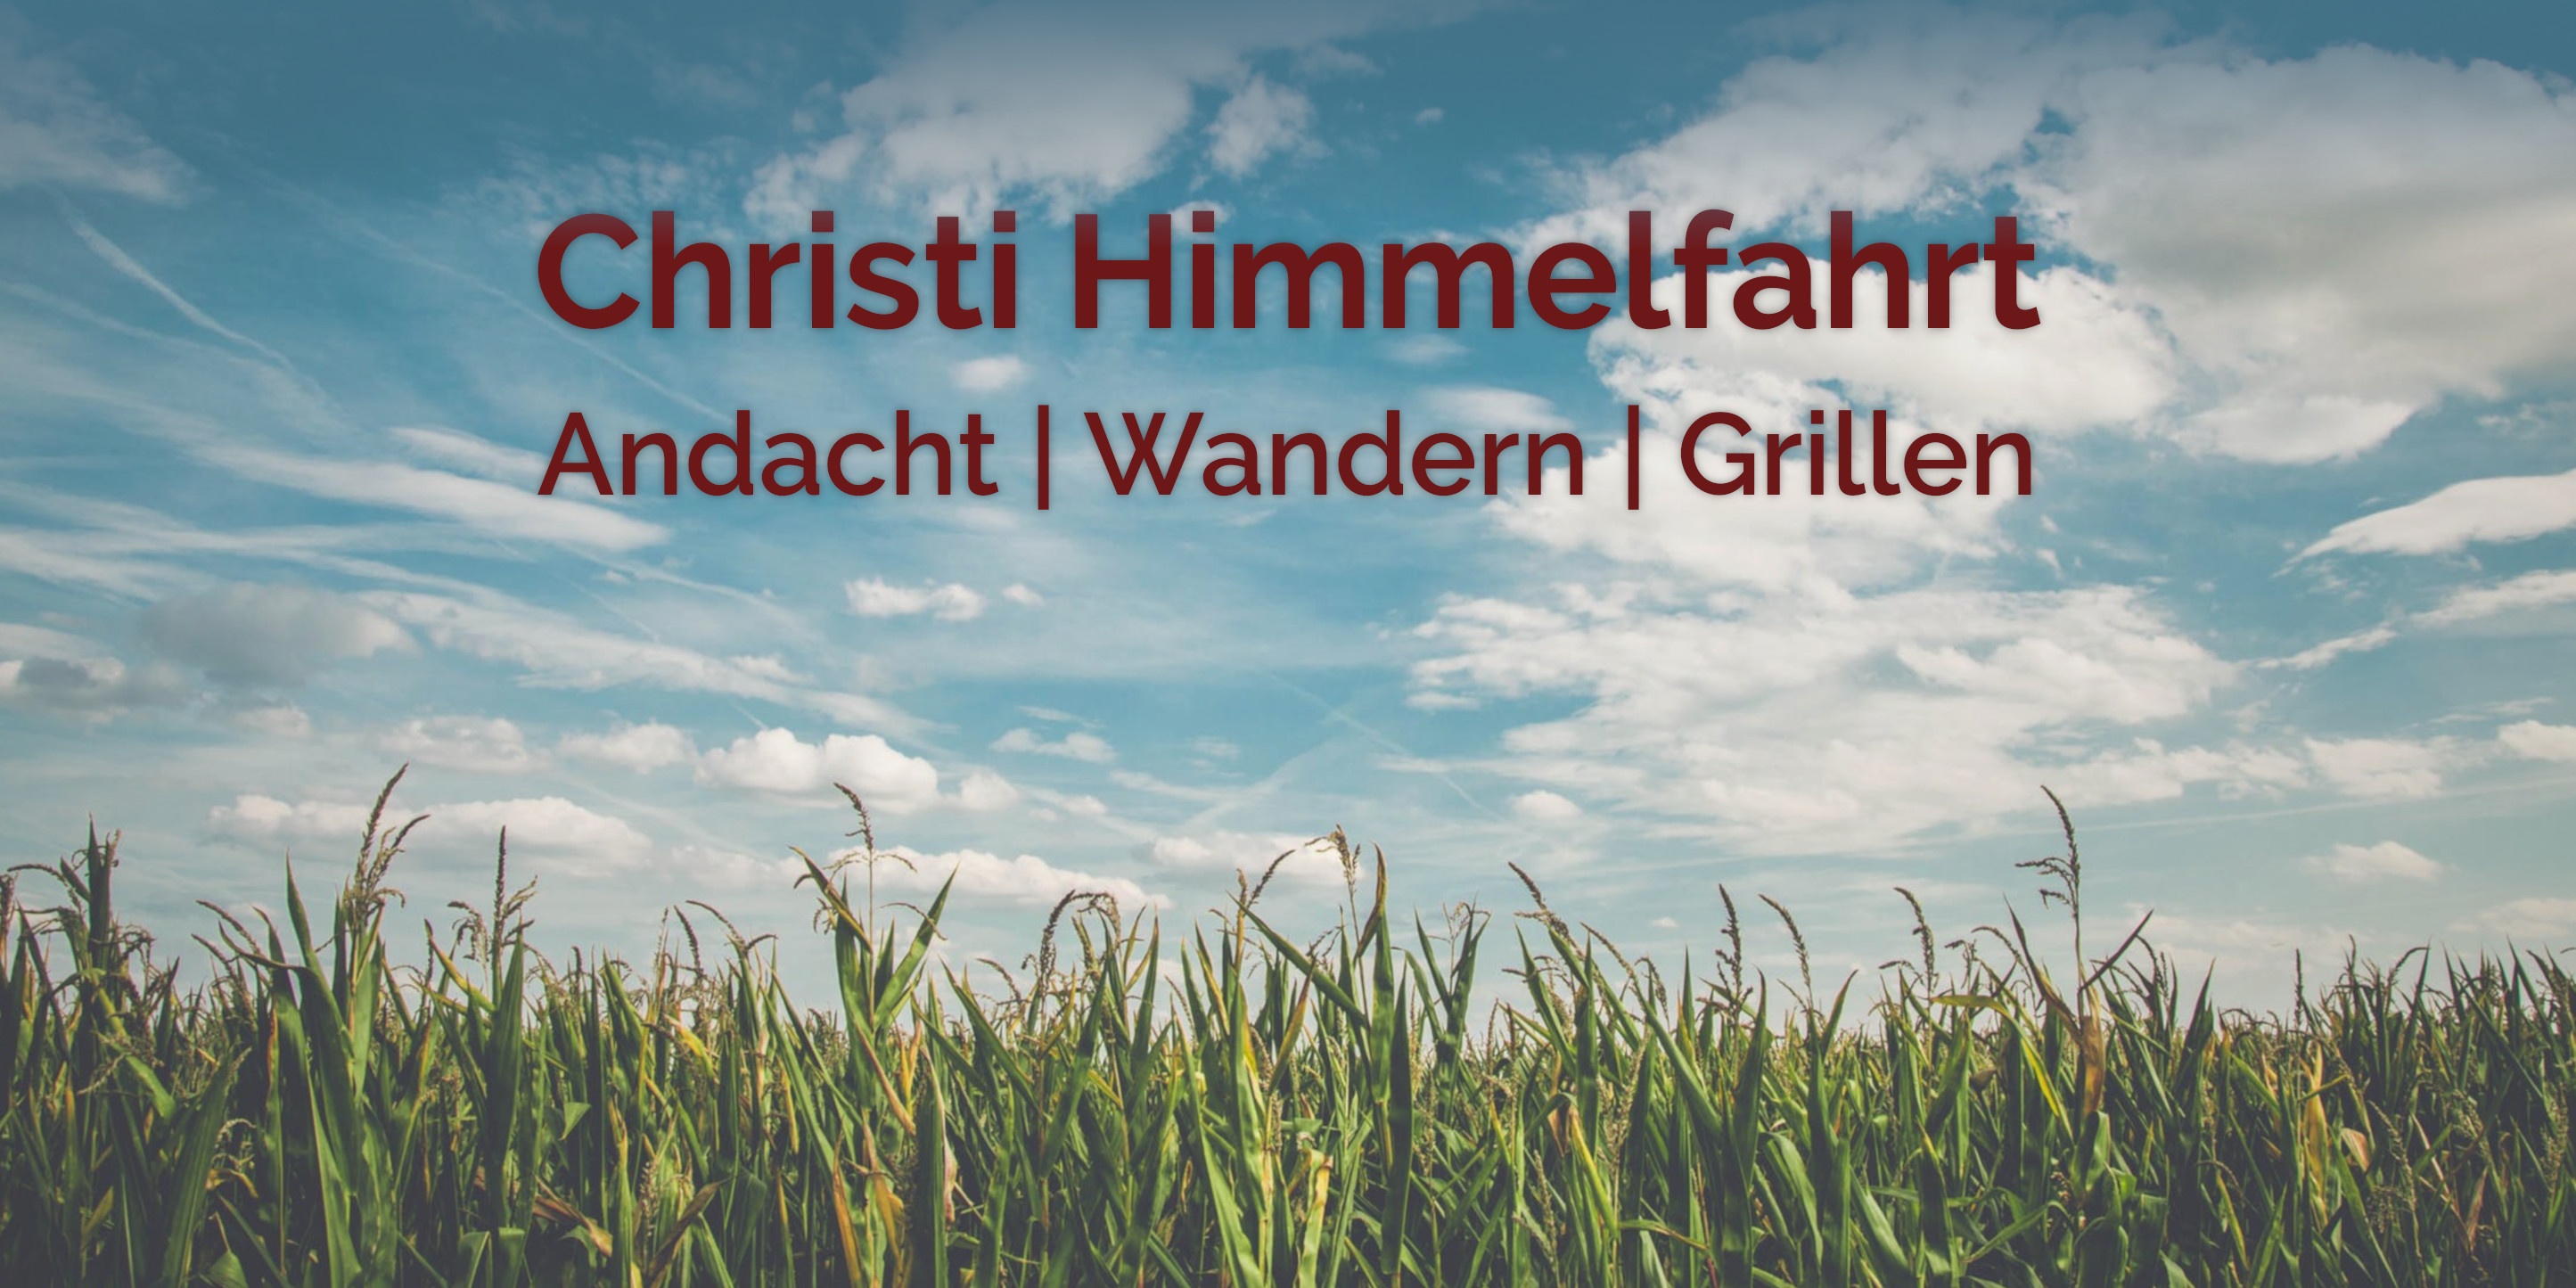 You are currently viewing Christi Himmelfahrt